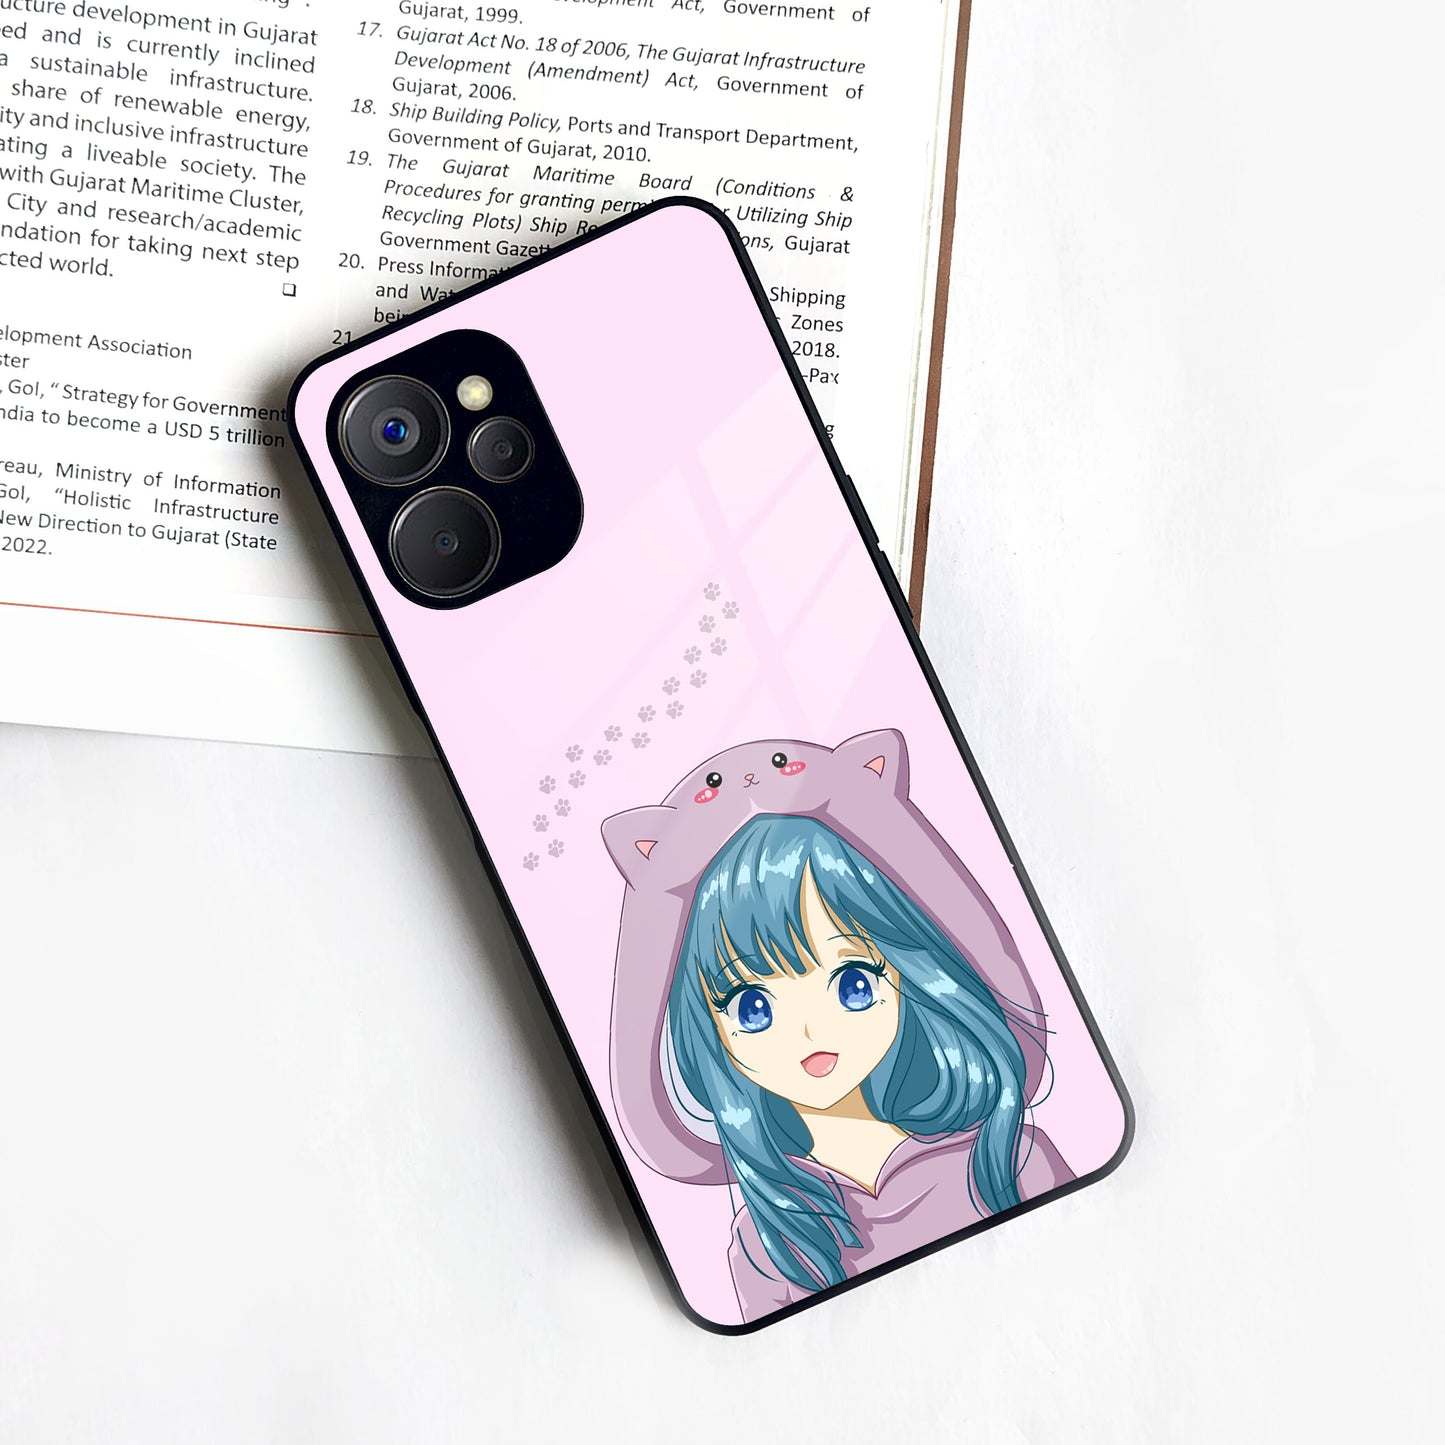 Purple Aesthetic Girl With Cat Phone Glass Case Cover For Realme/Narzo